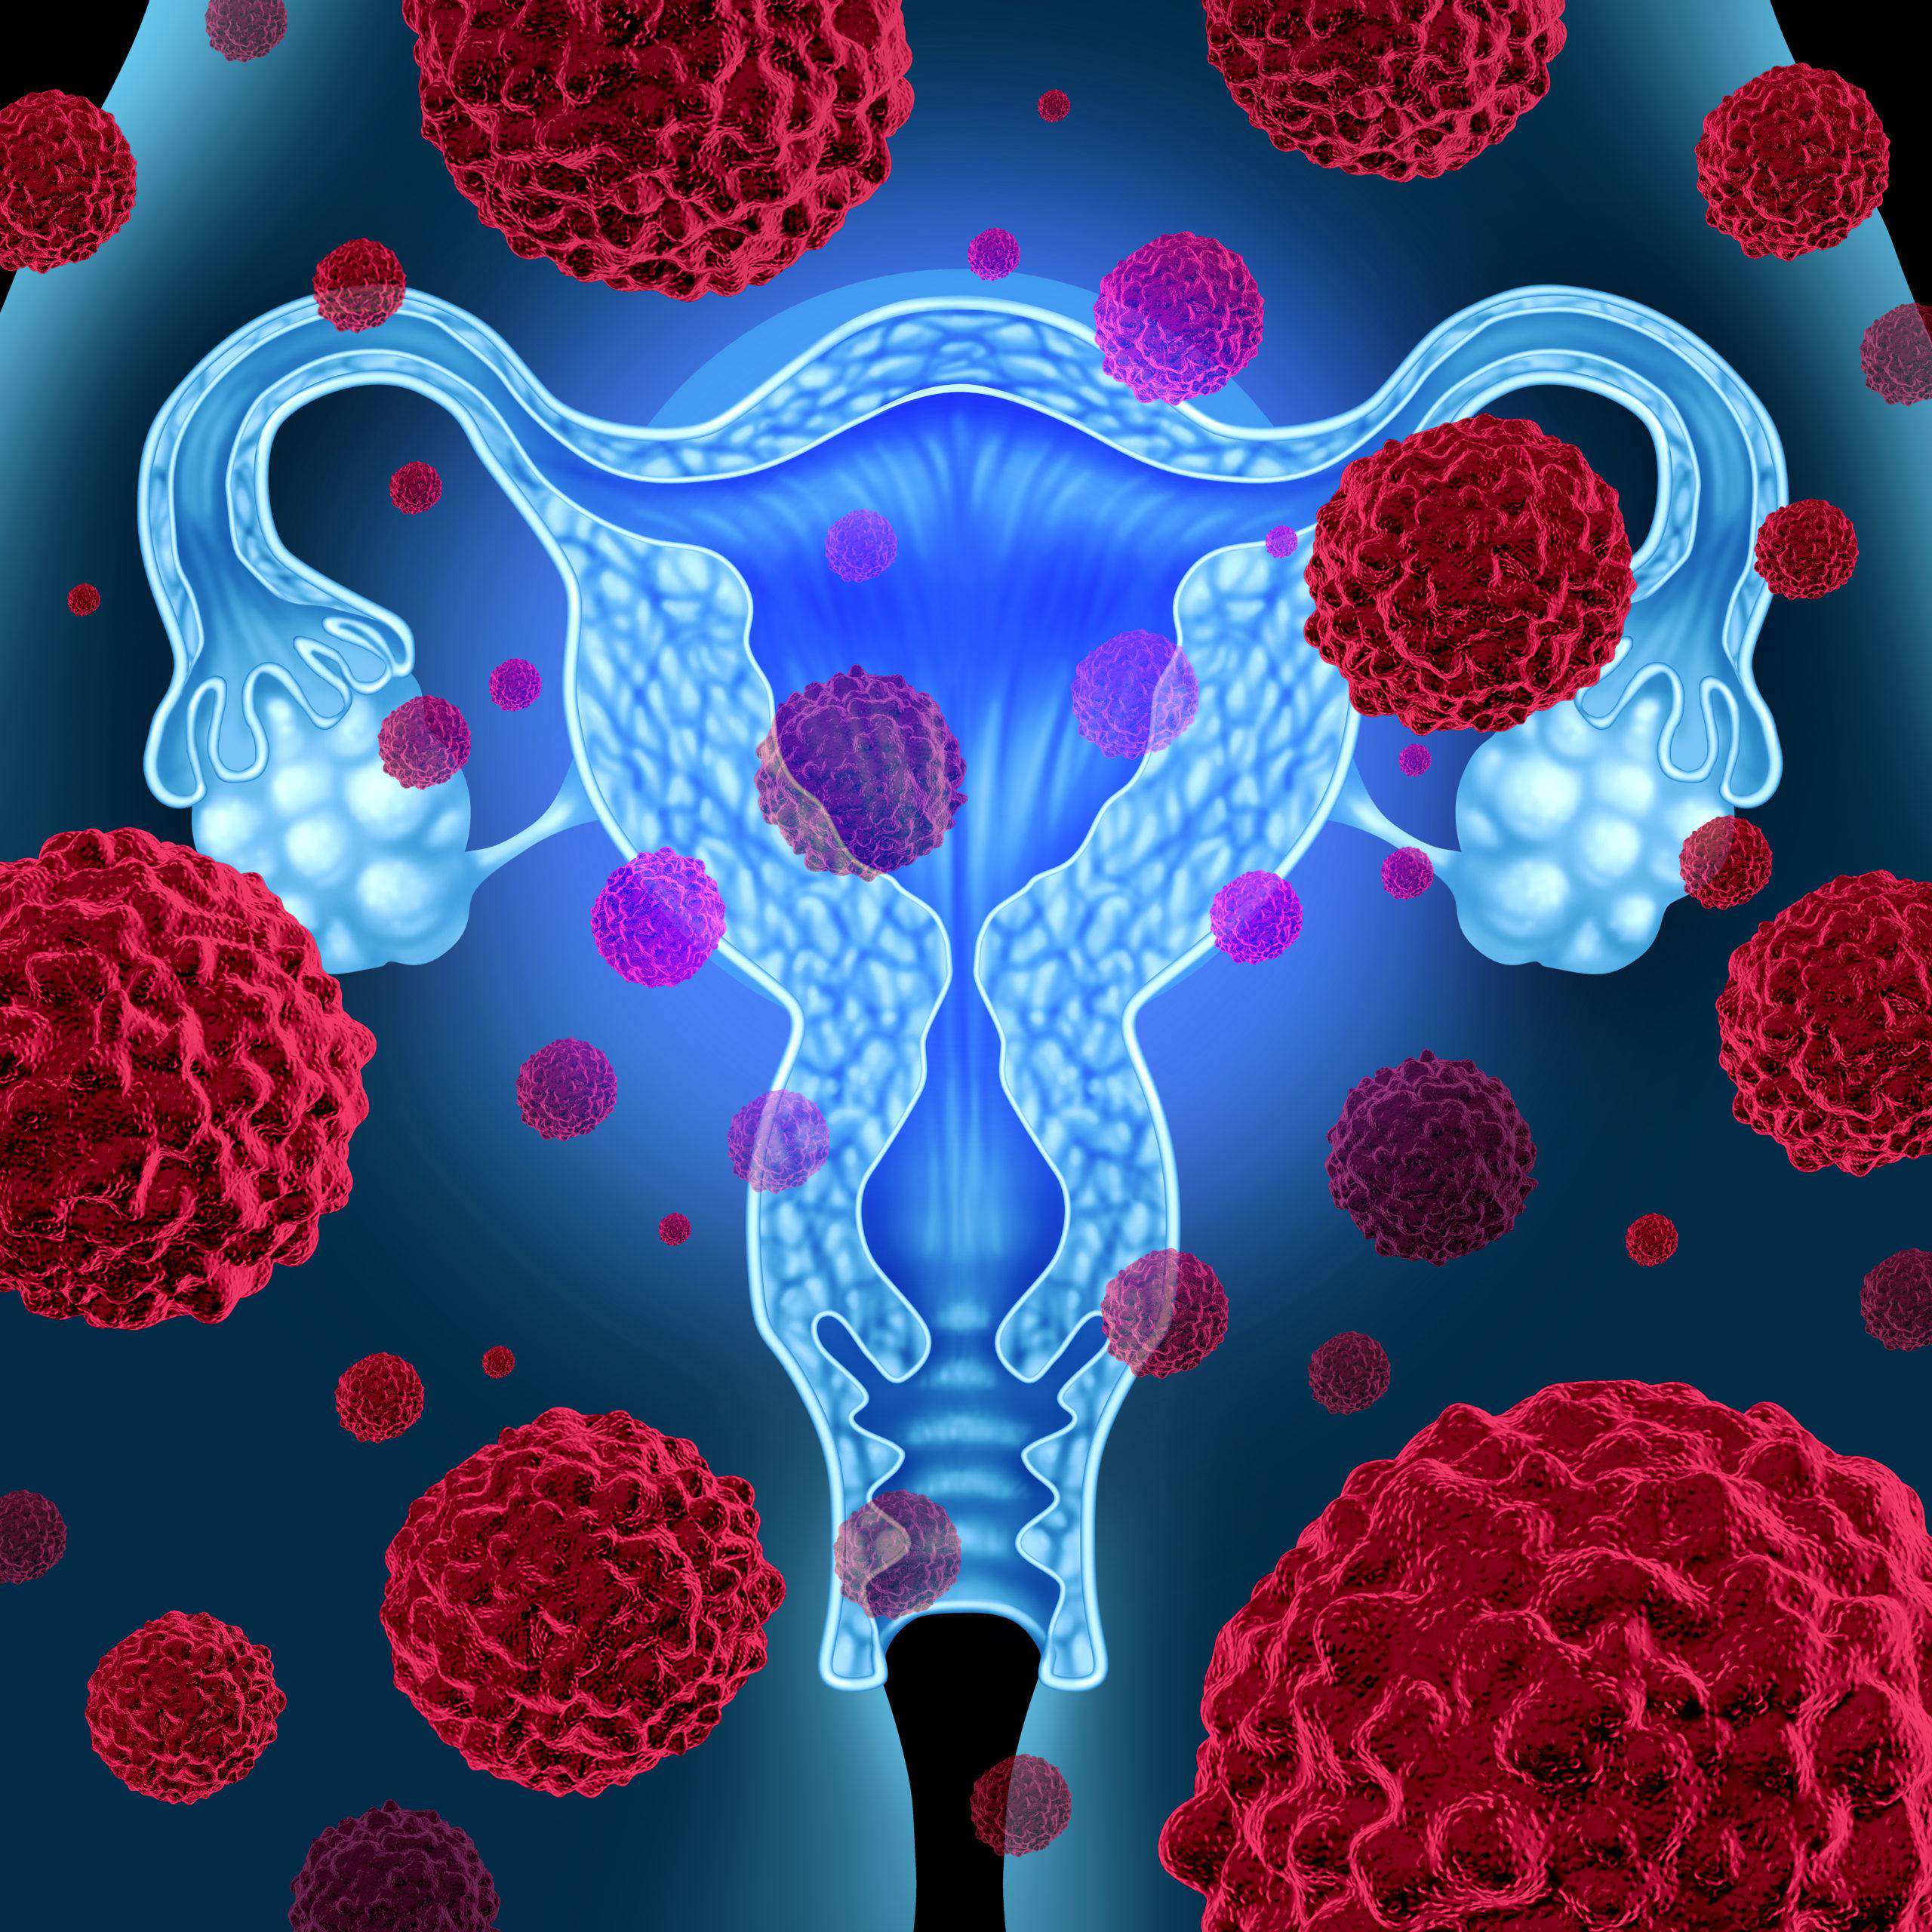 What are the symptoms of stage 1 ovarian cancer?